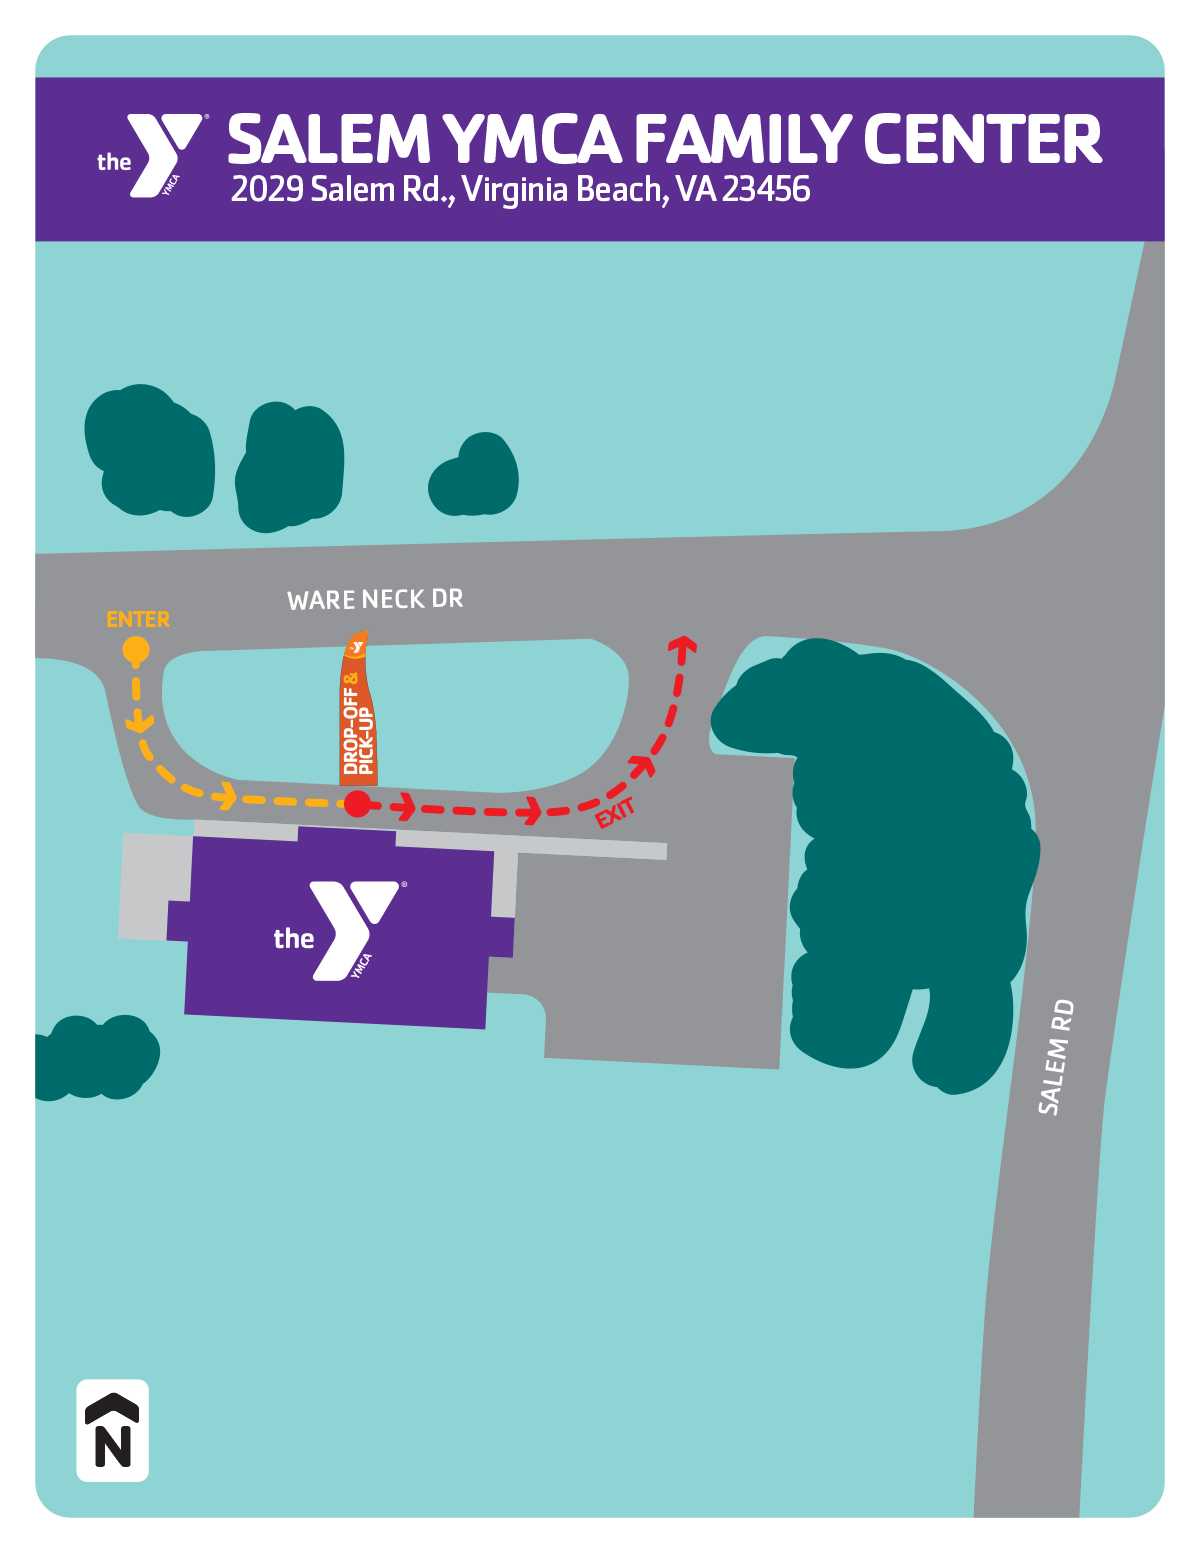 Summer camp drop-off & pick-up locations for the Salem YMCA Family Center